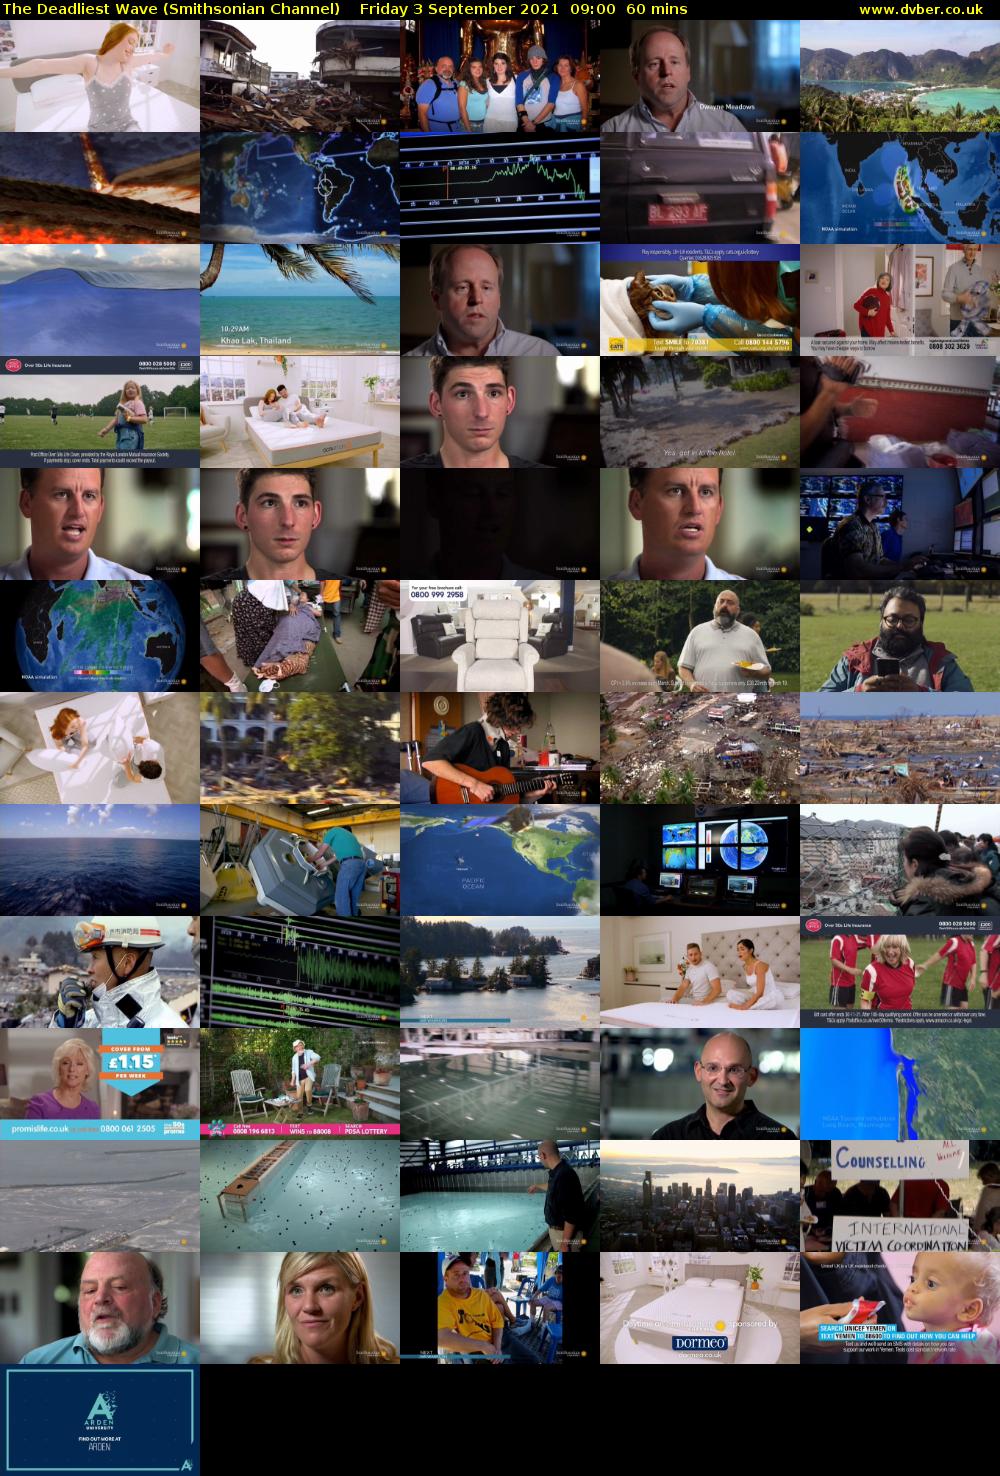 The Deadliest Wave (Smithsonian Channel) Friday 3 September 2021 10:00 - 11:00